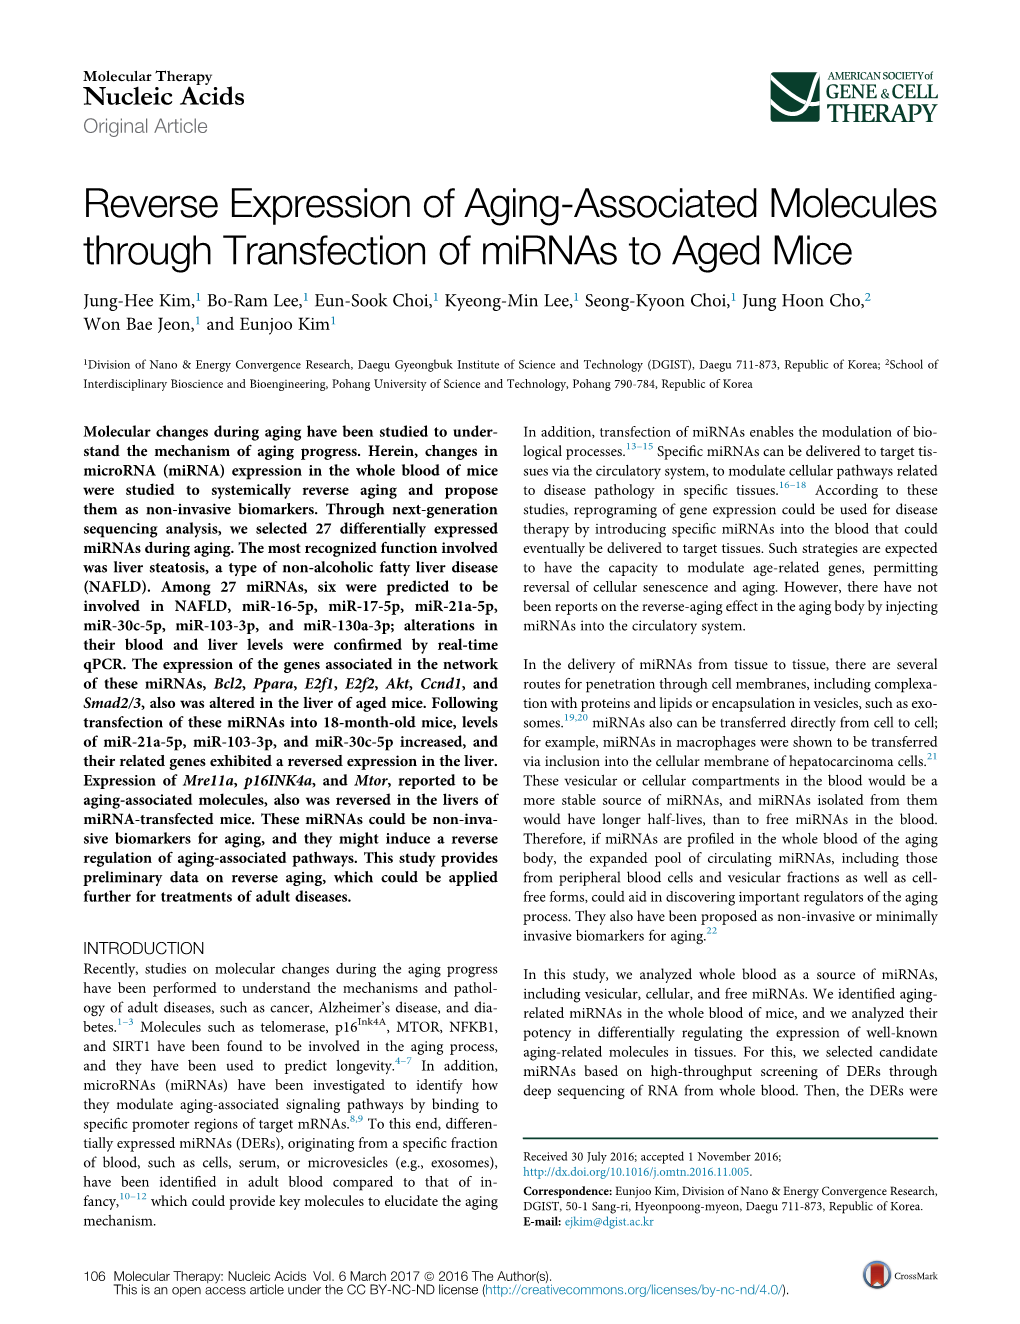 Reverse Expression of Aging-Associated Molecules Through Transfection of Mirnas to Aged Mice